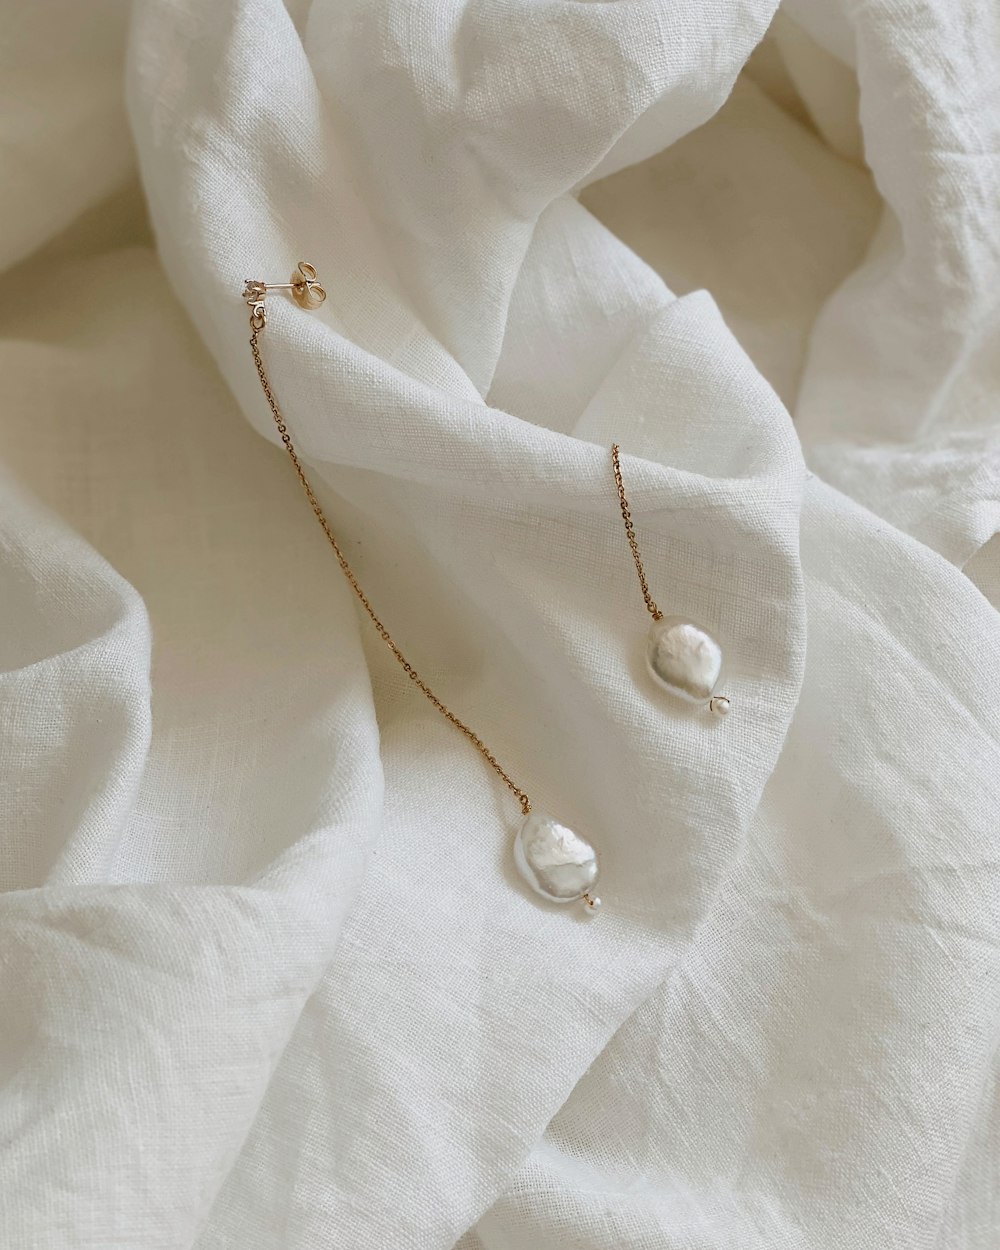 a close up of a necklace on a white cloth